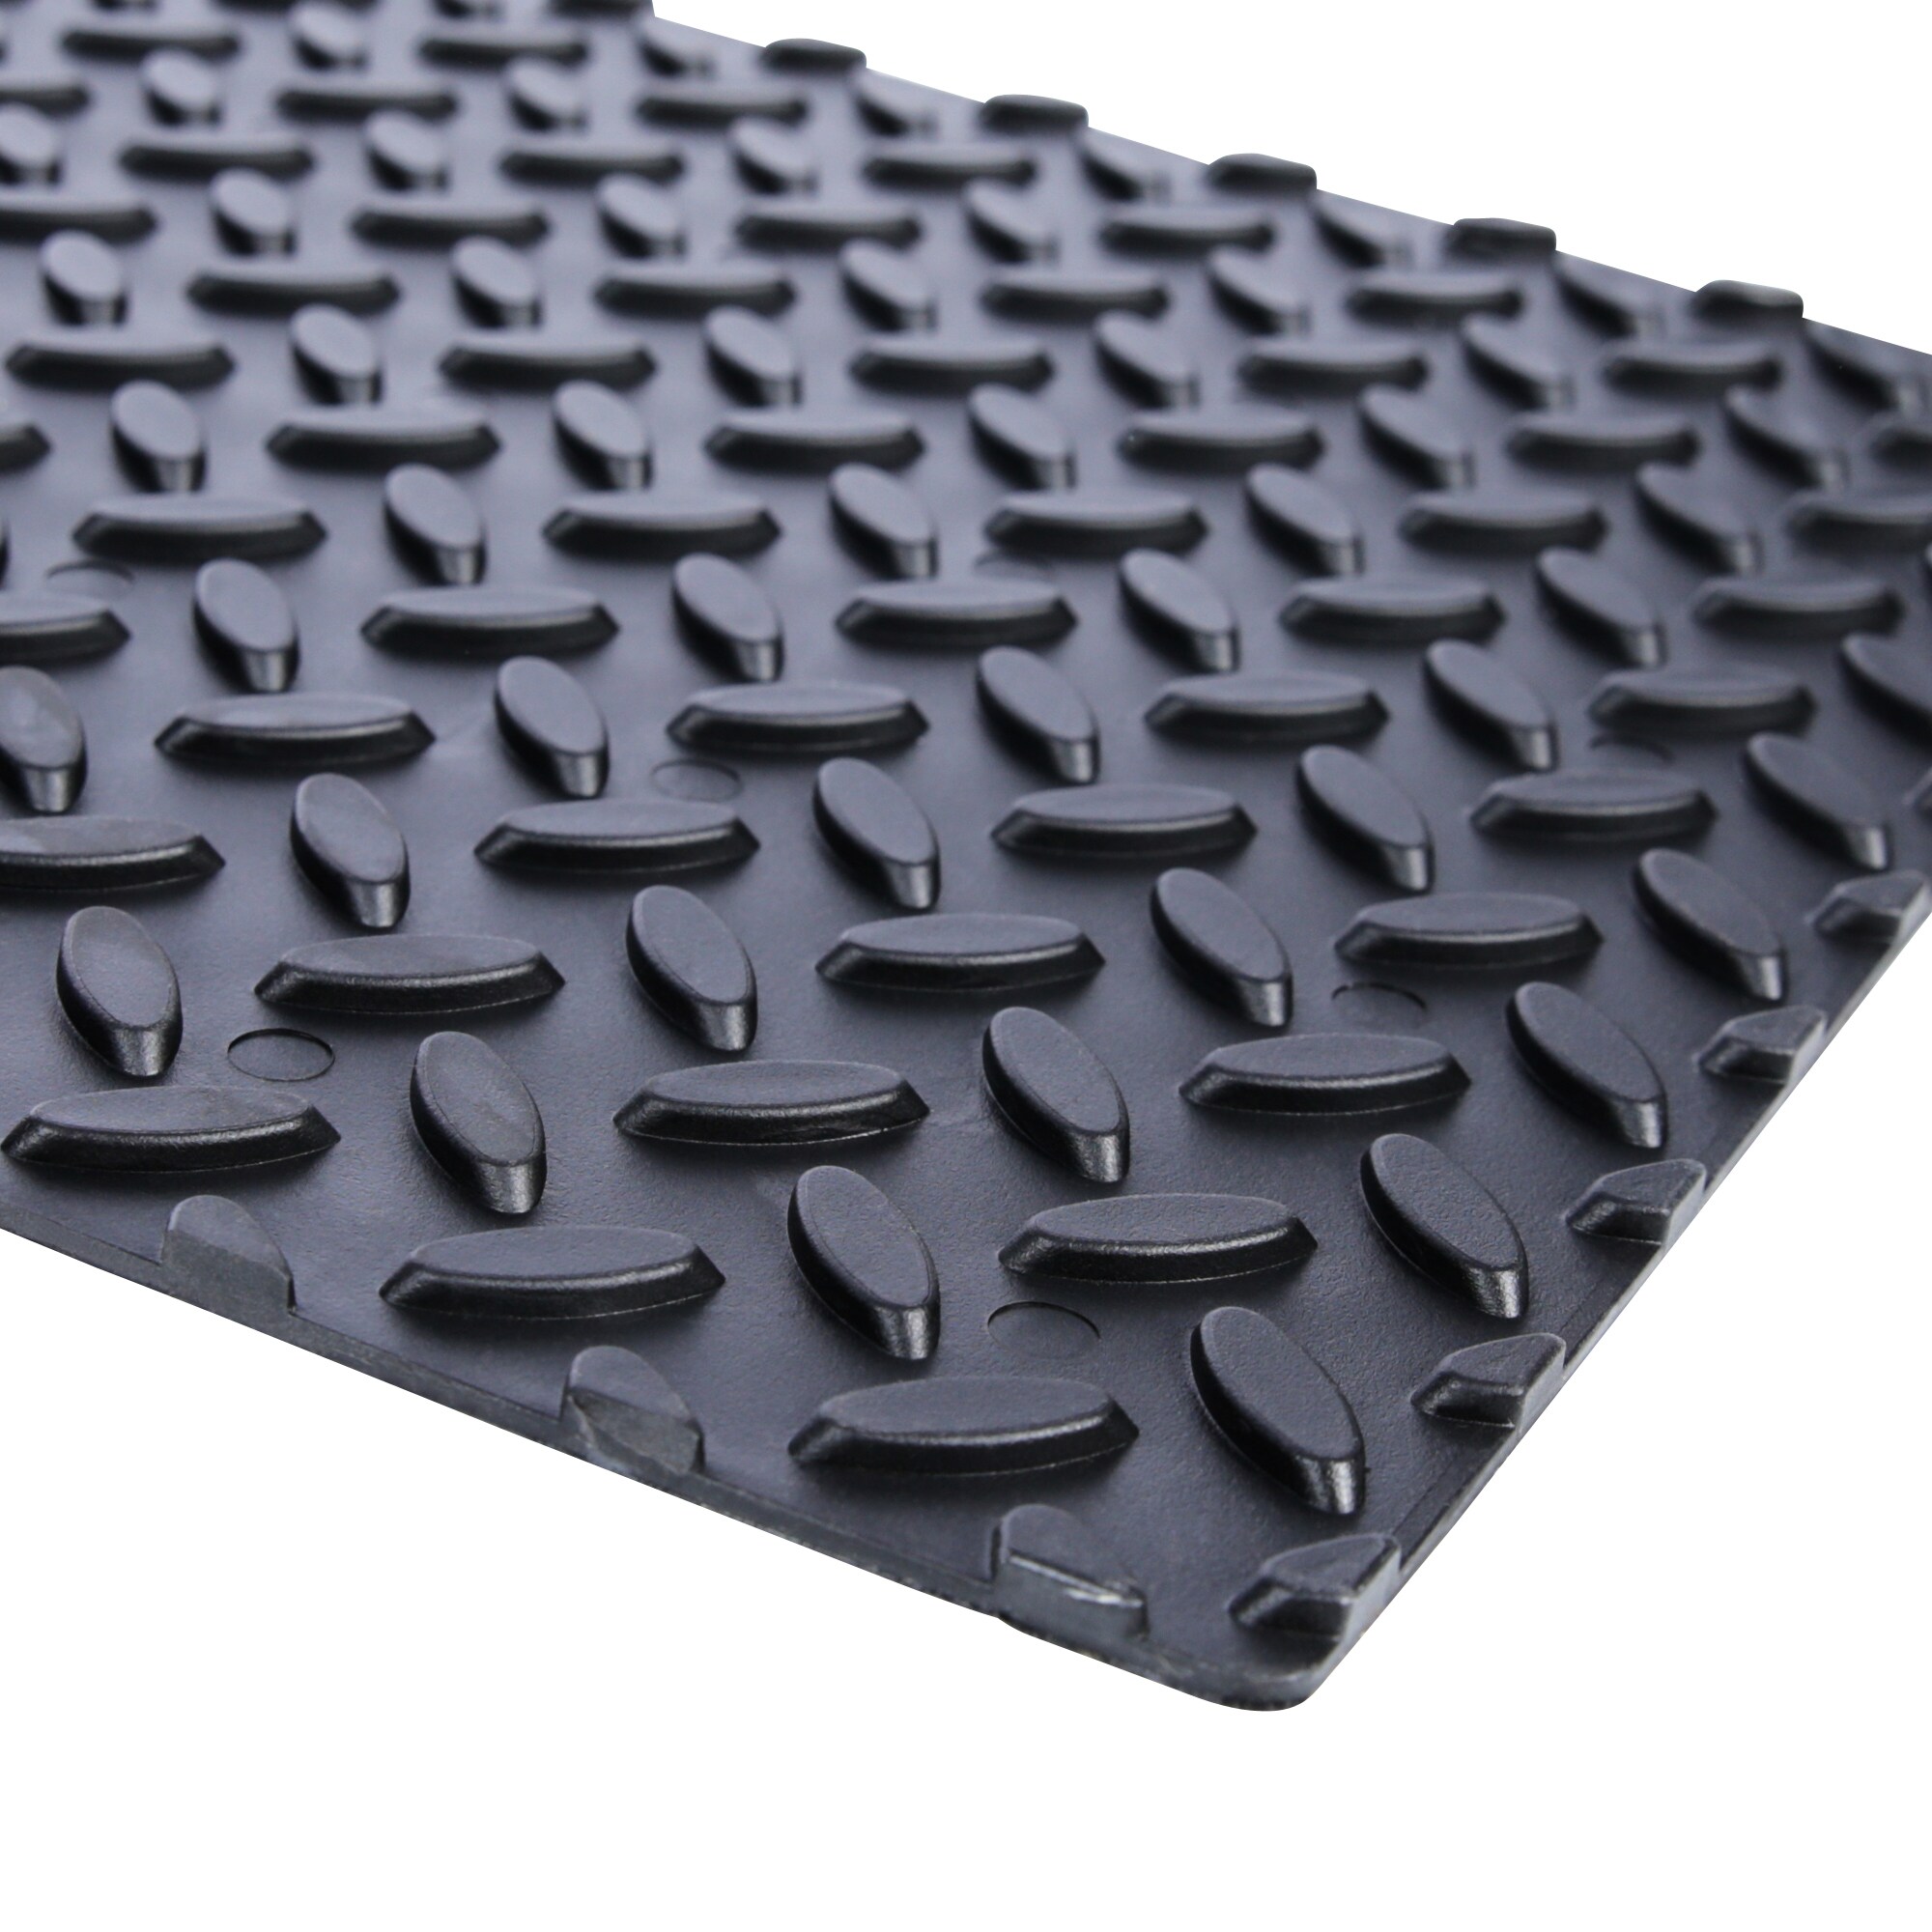 Buffalo Tools RSSTEPBOX Rubber Step Cover 4In X 17In